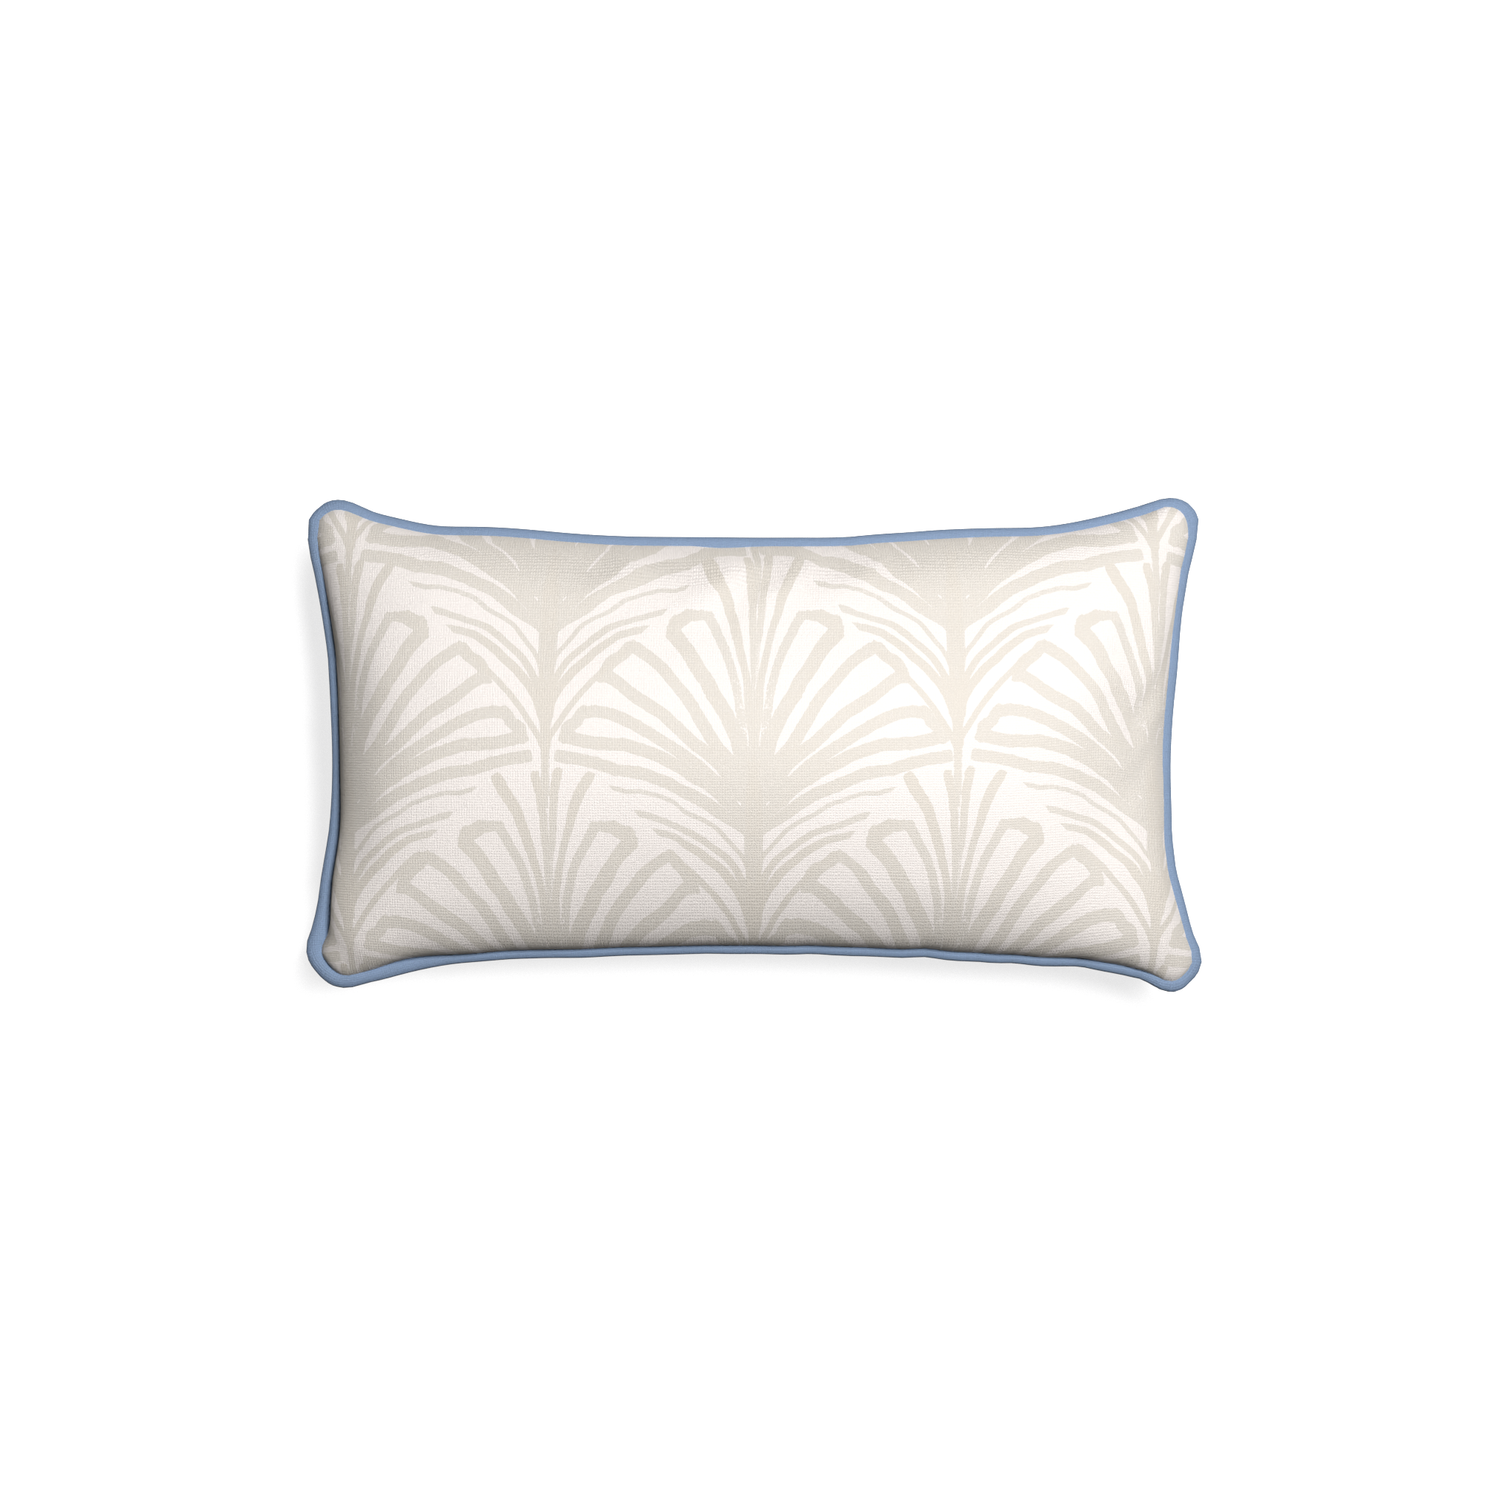 Petite-lumbar suzy sand custom beige palmpillow with sky piping on white background